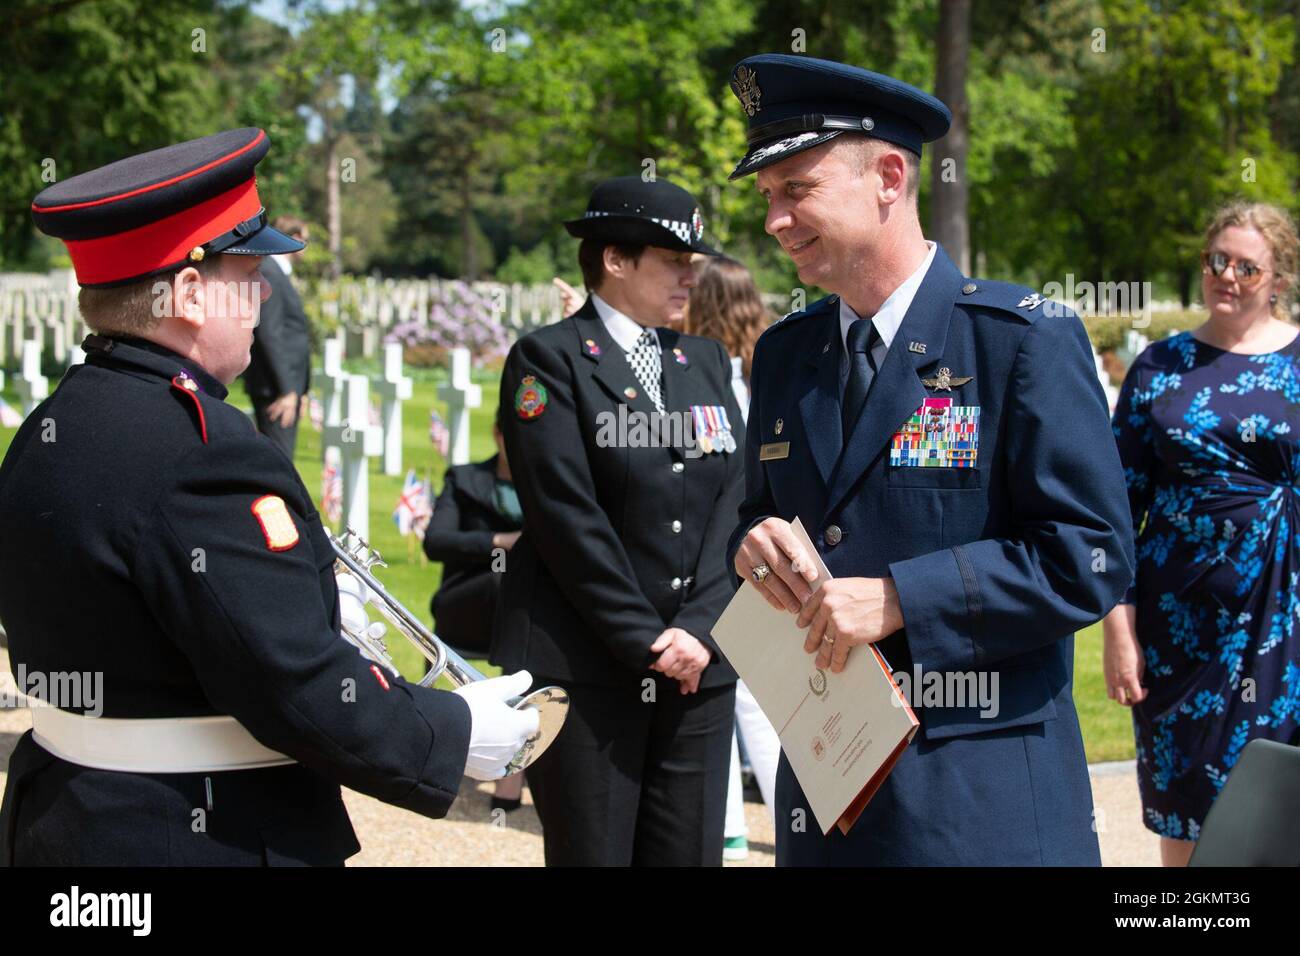 U.S. Air Force Col. Jon Hannah, right, 422nd Air Base Group commander, talks with Bugler Heidi Watkins, left, Canadian High Commission, UK, at a 2021 Memorial Day ceremony at the Brookwood American Military Cemetery, England, May 30, 2021. Memorial Day is one of our Nation's most solemn occasions. It serves as a chance to pause, reflect, and honor the women and men who gave the last full measure defending our Nation and our democratic ideals. Stock Photo